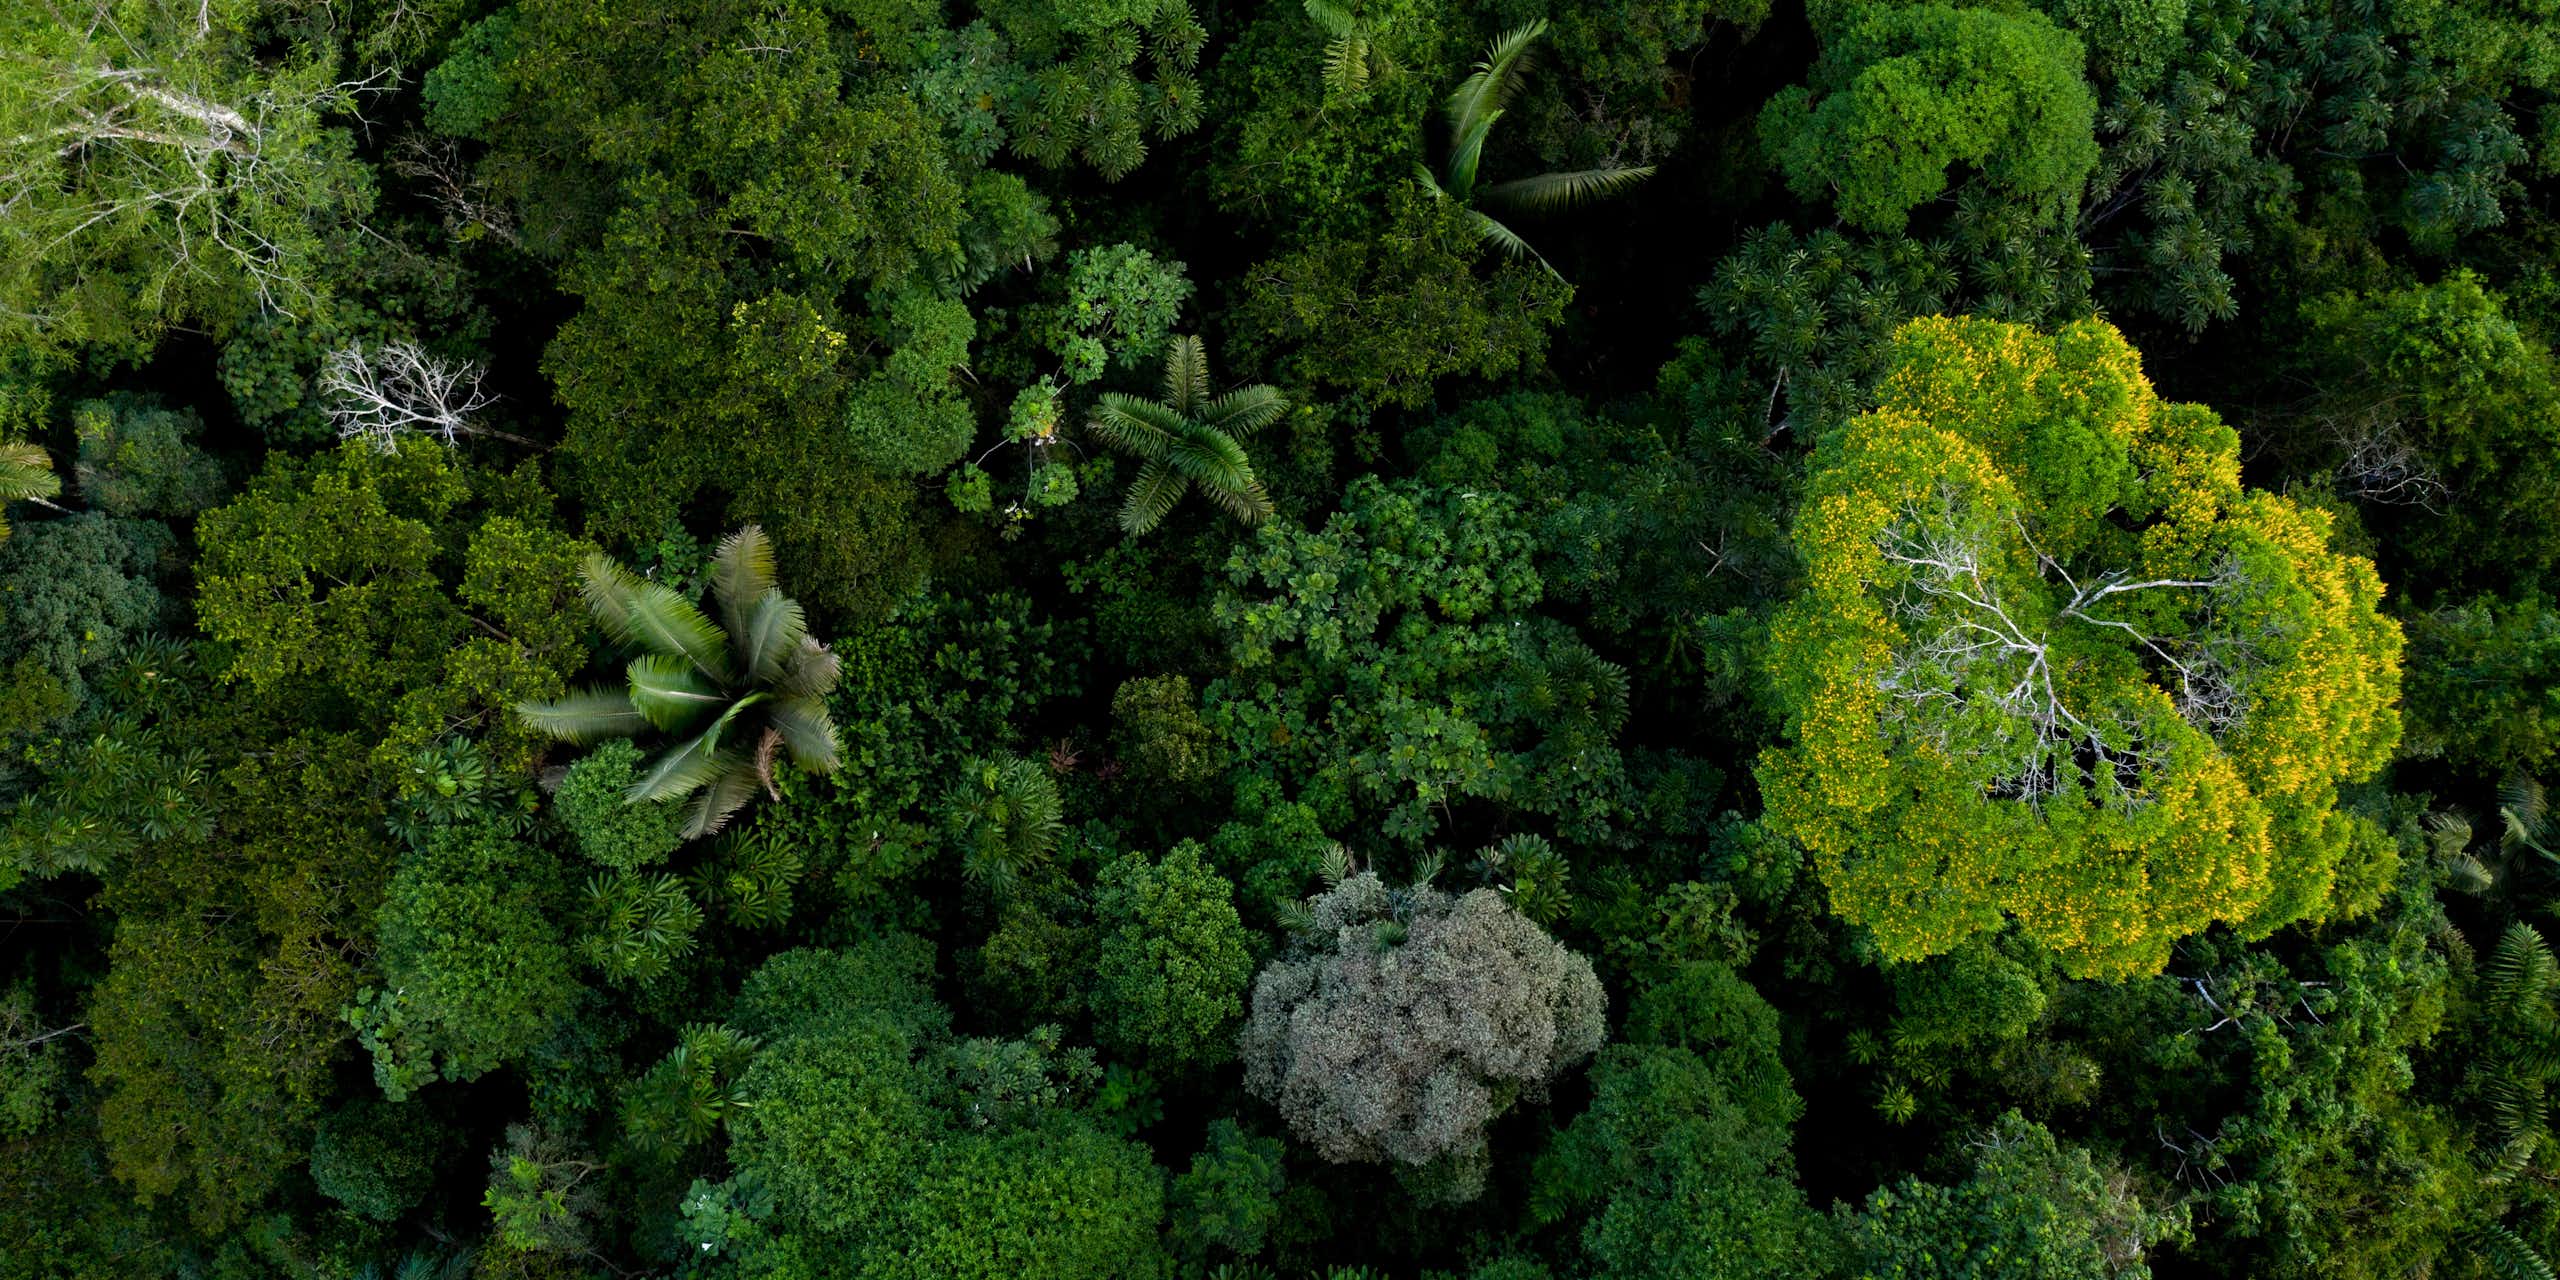 The diverse Amazon forest seen from above, a tropical forest canopy